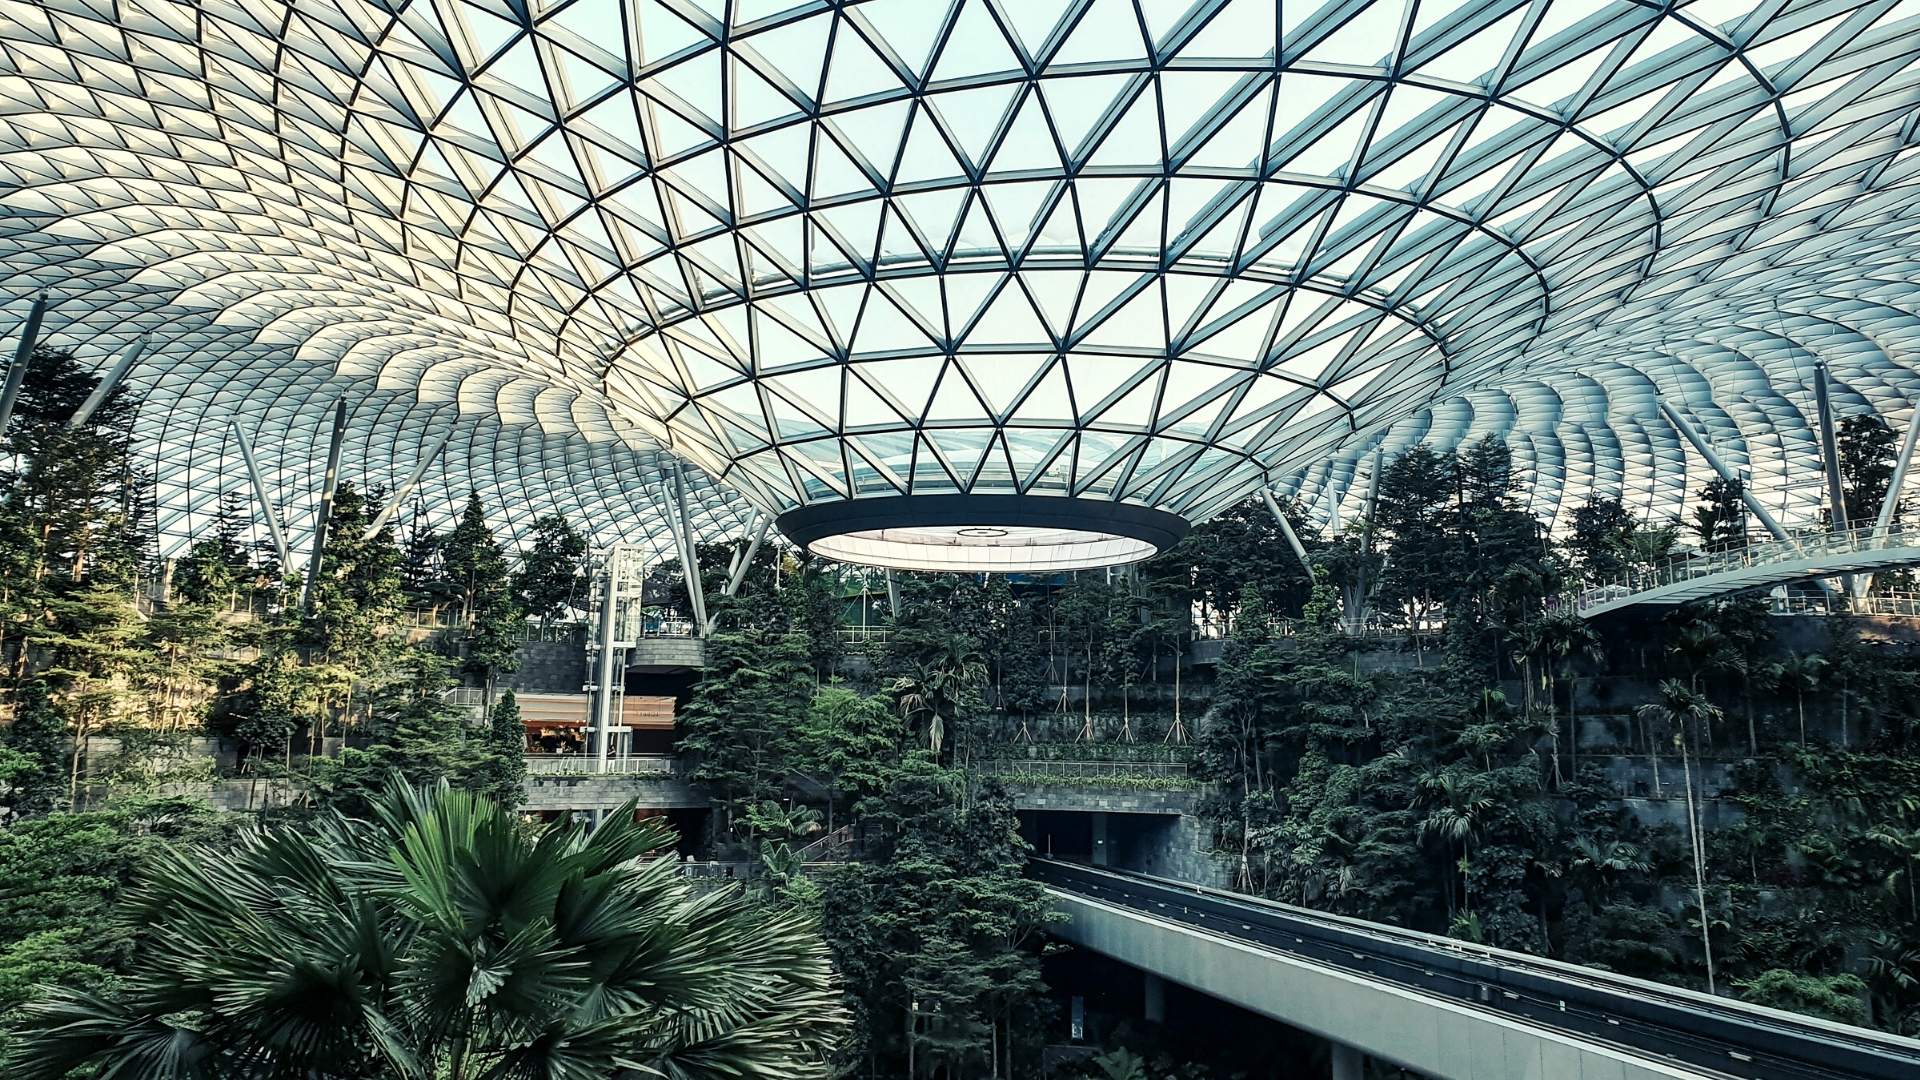 The Best Airport In The World: Singapore Changi Airport